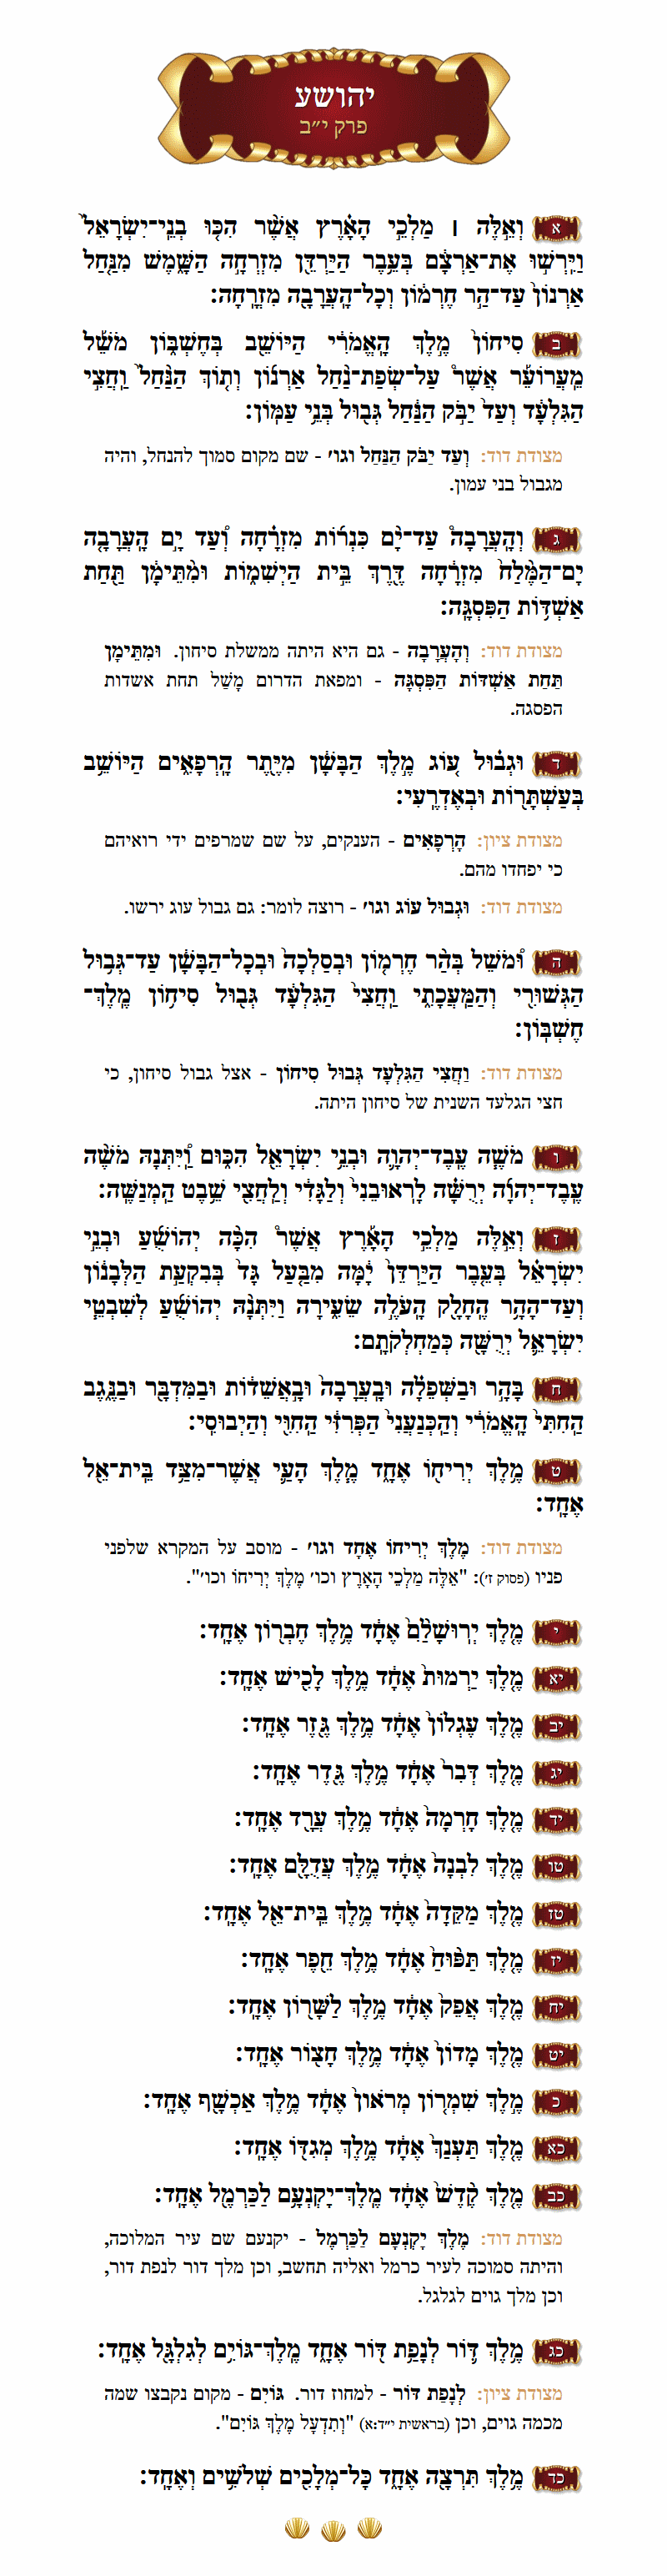 Sefer Yehoshua Chapter 12 with commentary